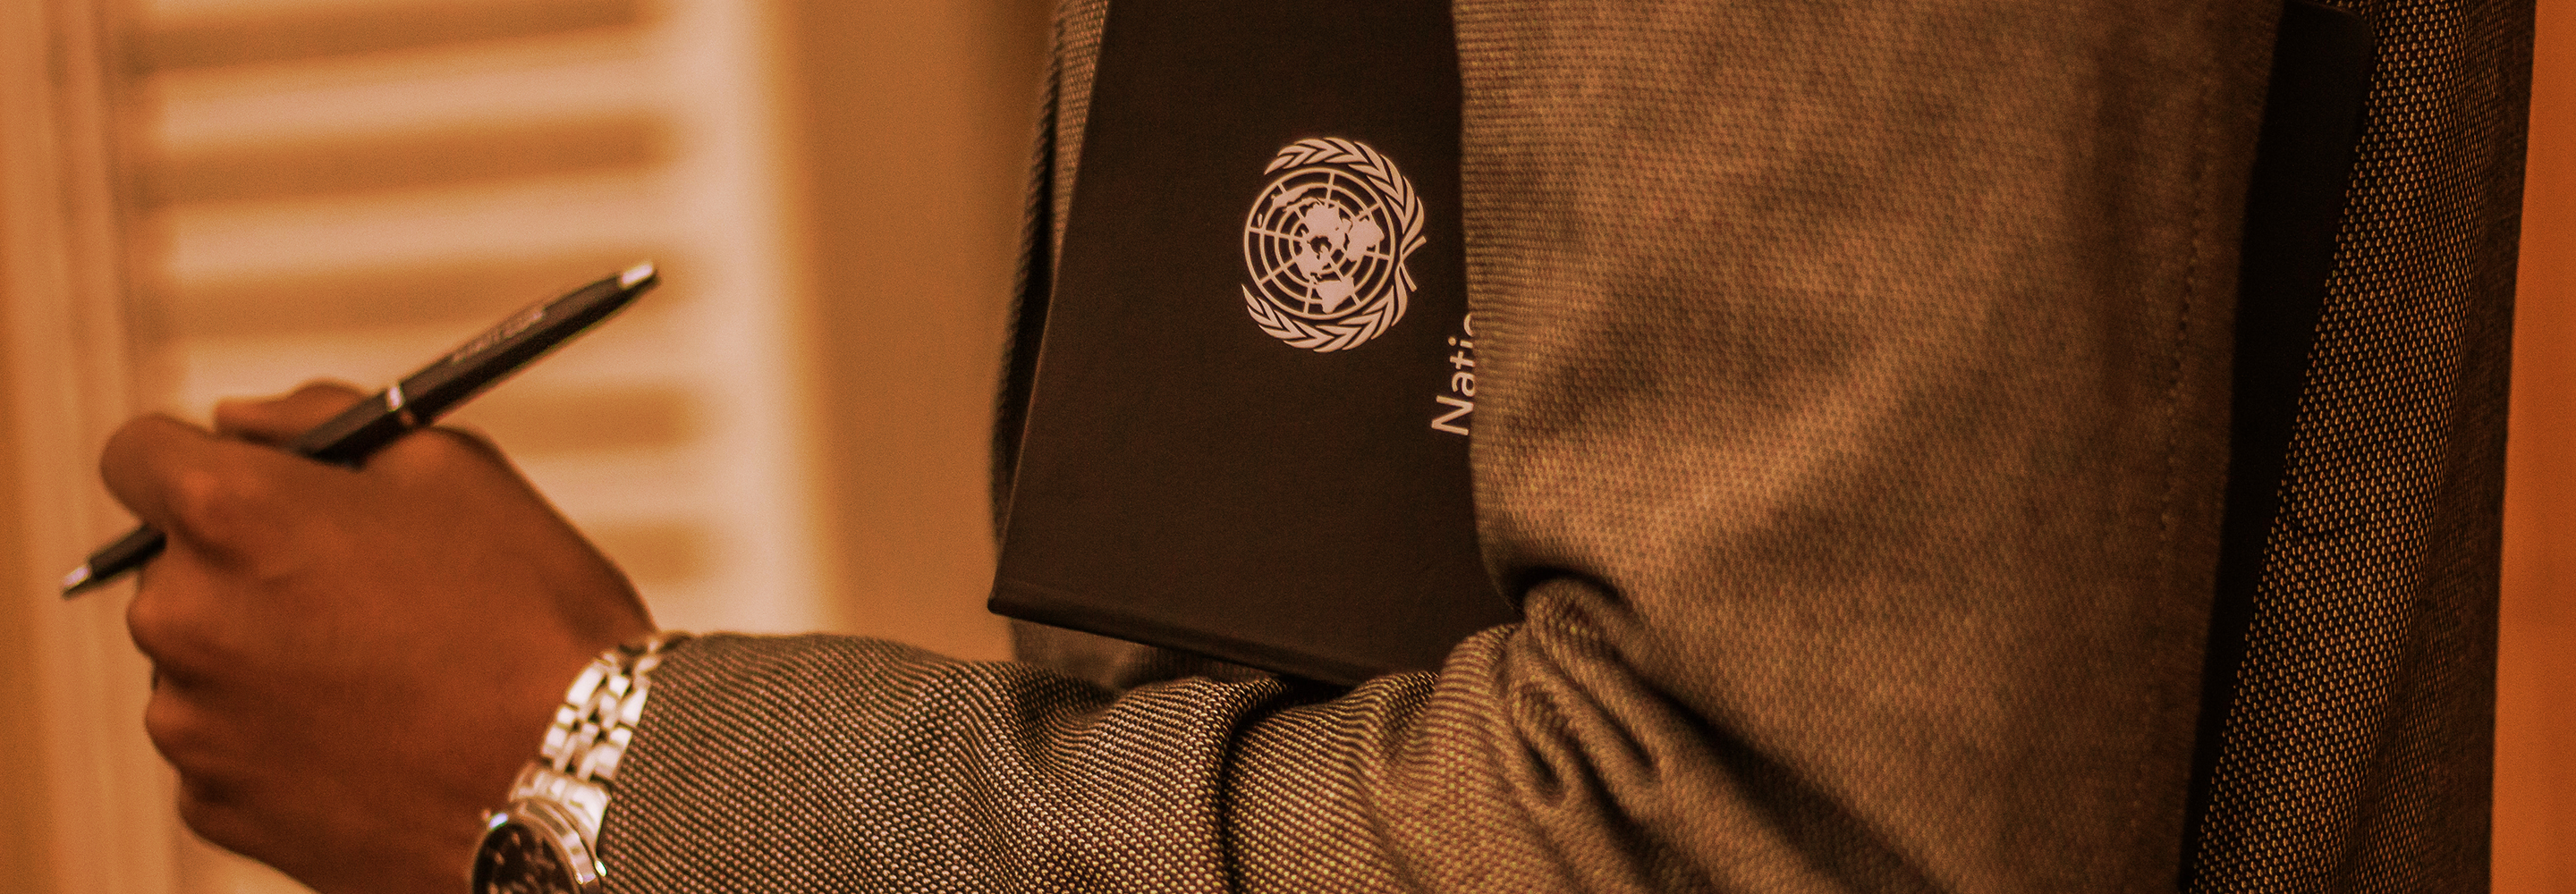 Person wearing a suit holding United Nations folder